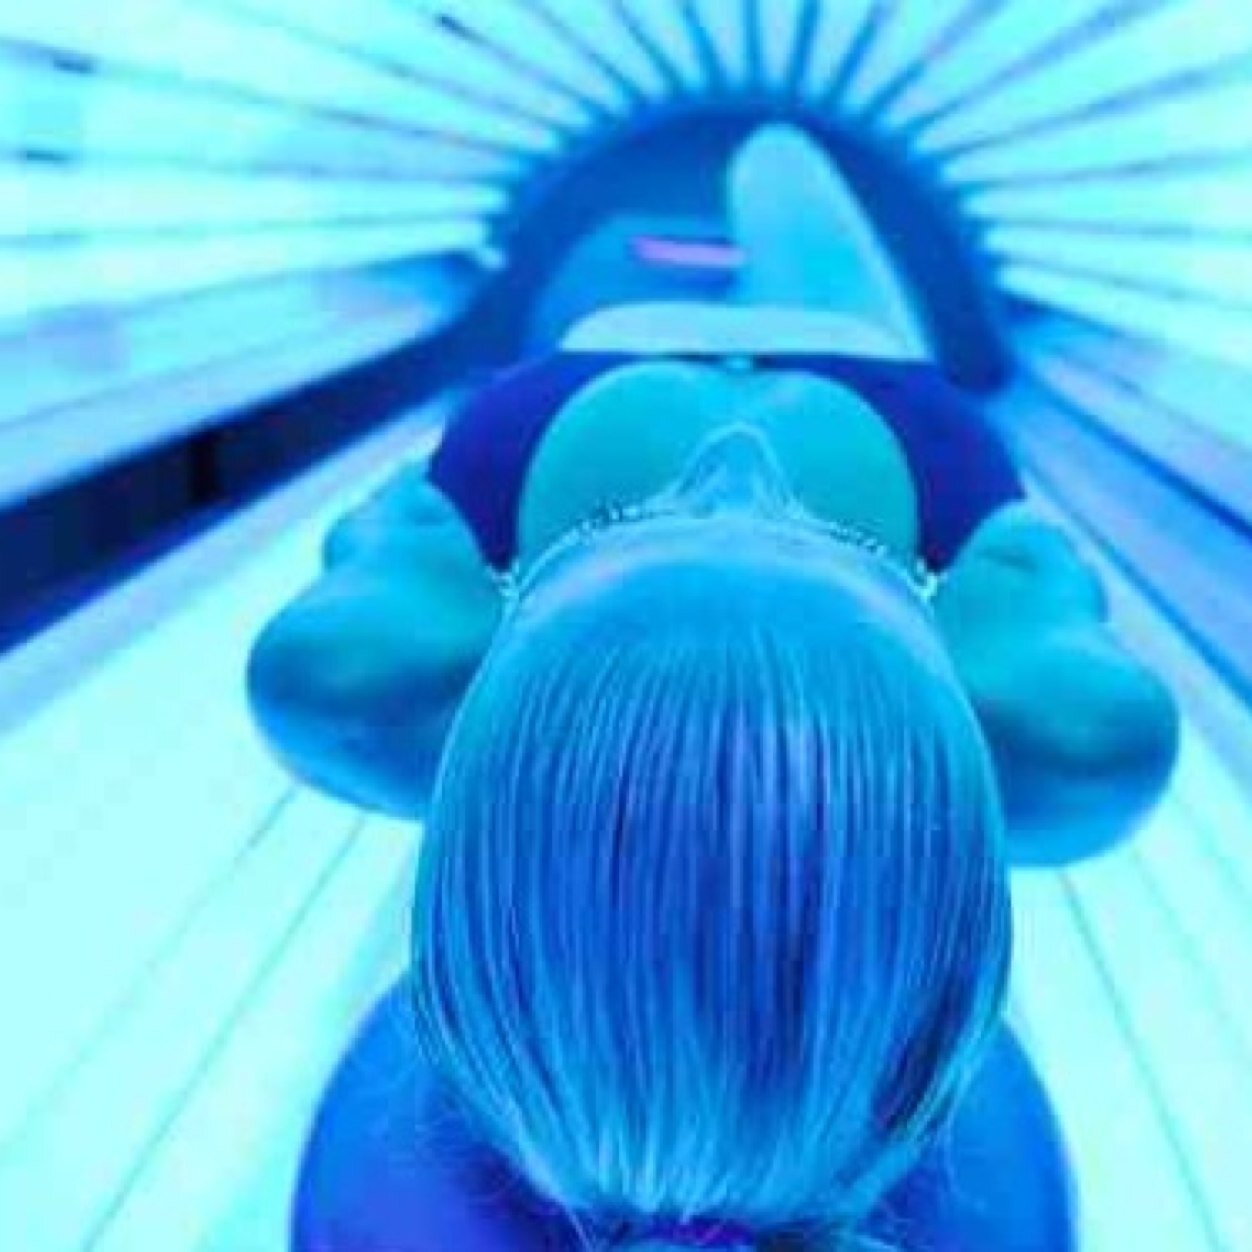 Confessions of a tanning salon employee: the good, the bad and the ugly